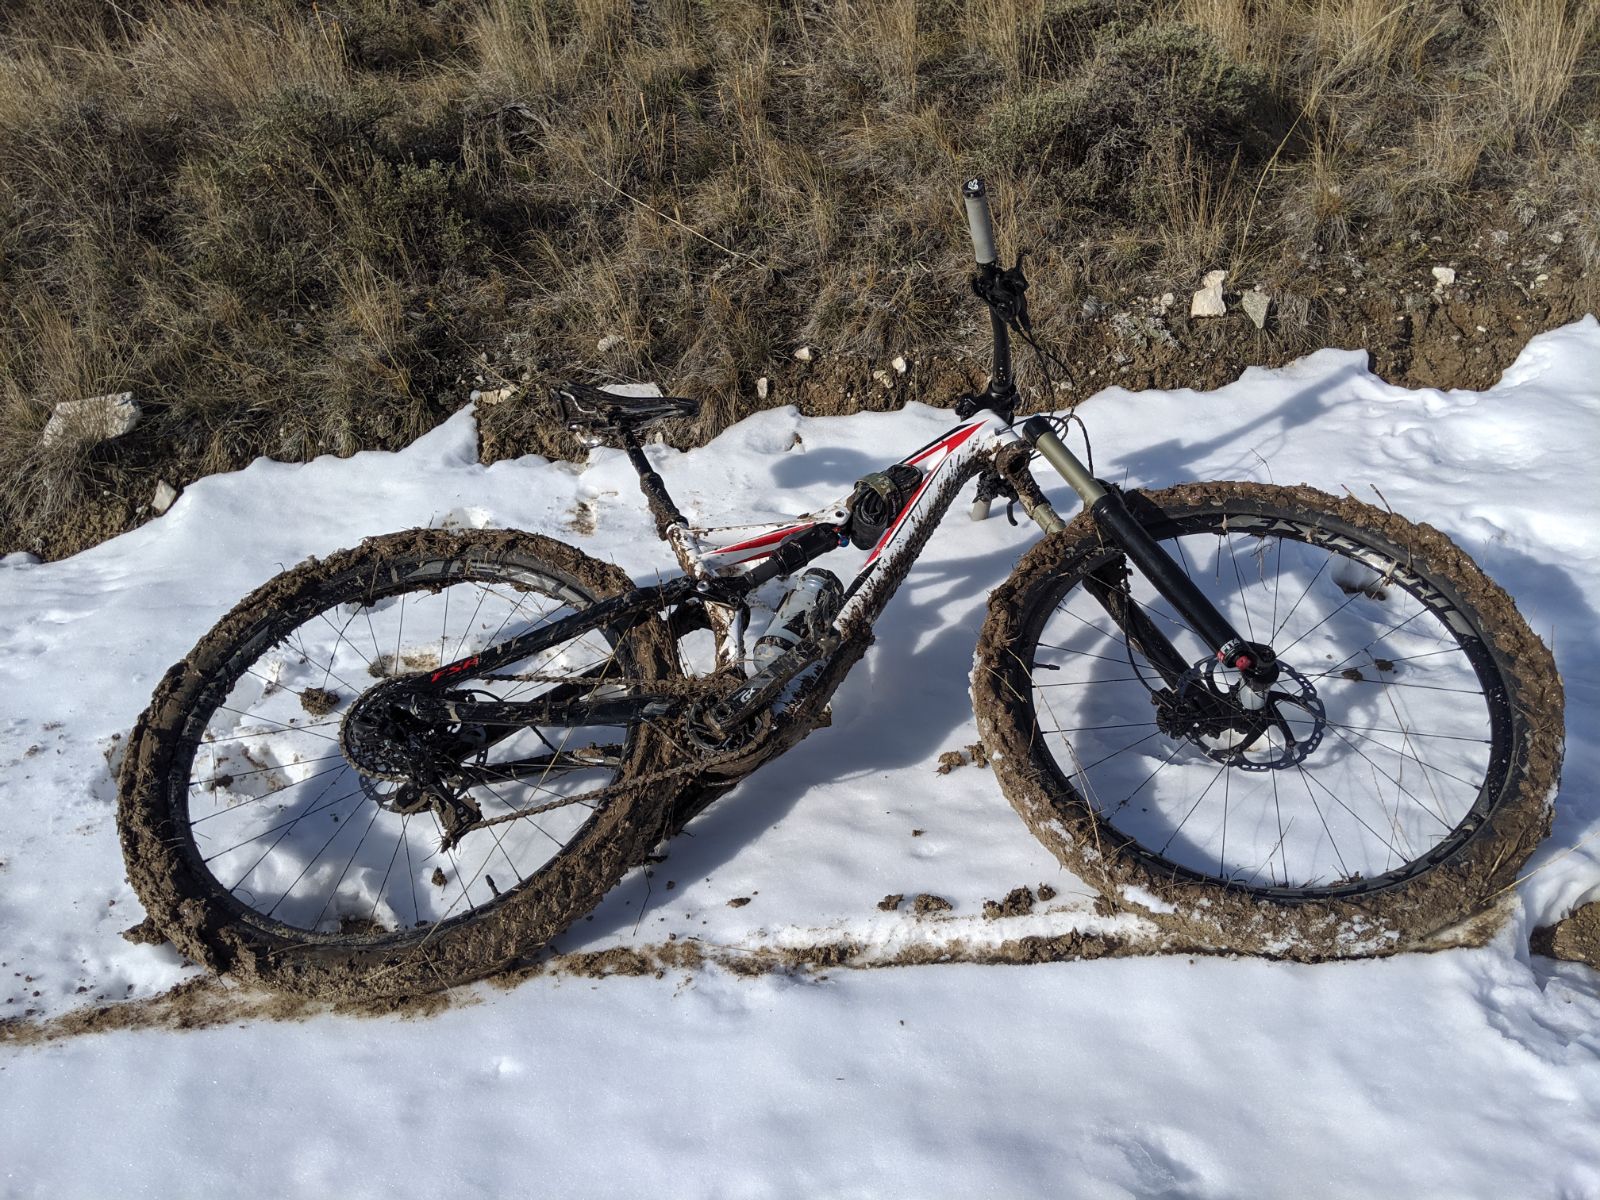 Mountain bike in the snow and mud from thawing frost